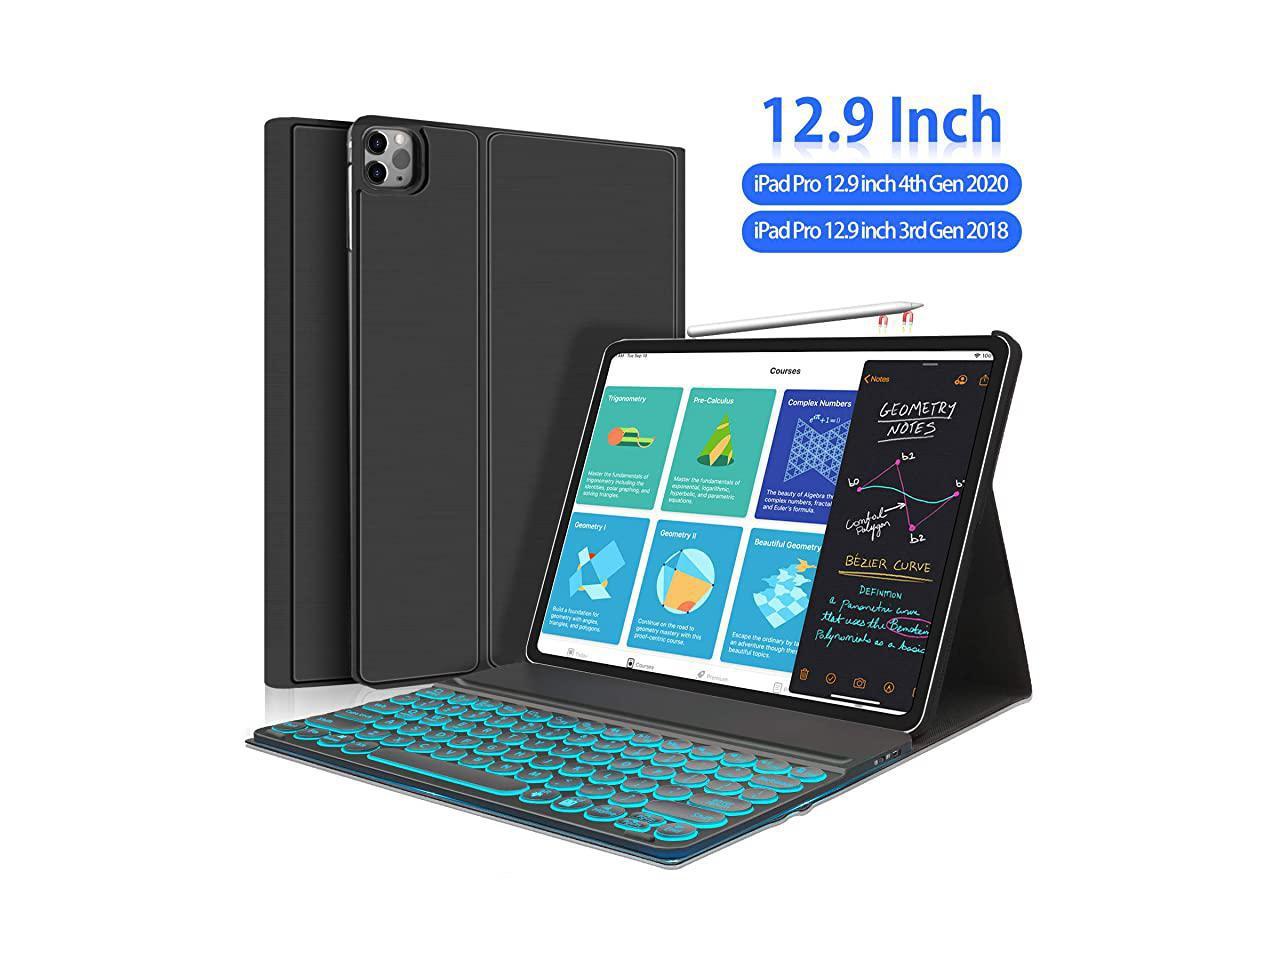 Keyboard Case for New iPad Pro 12.9 2021 5th Generation//2020 4th Gen//2018 3rd Gen -Rose Gold 7 Colors Backlit Detachable Keyboard Folio Smart Cover for iPad Pro 12.9 inch Support Pencil Charging